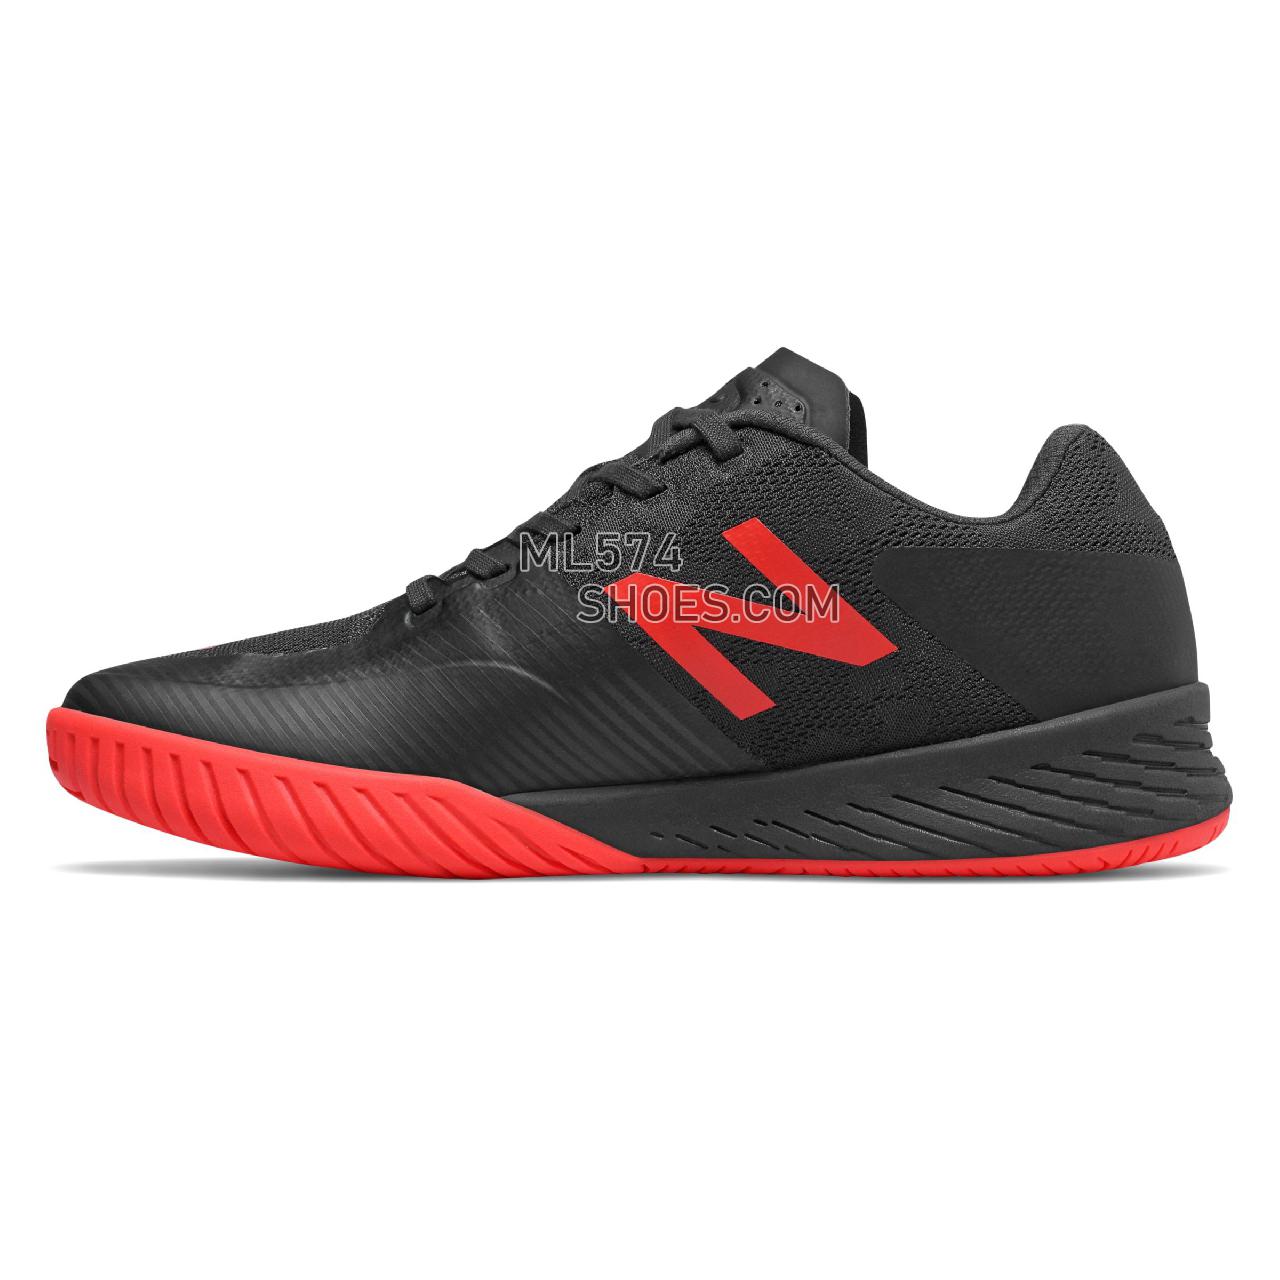 New Balance 896v3 - Men's Tennis - Black with Energy Red - MCH896R3